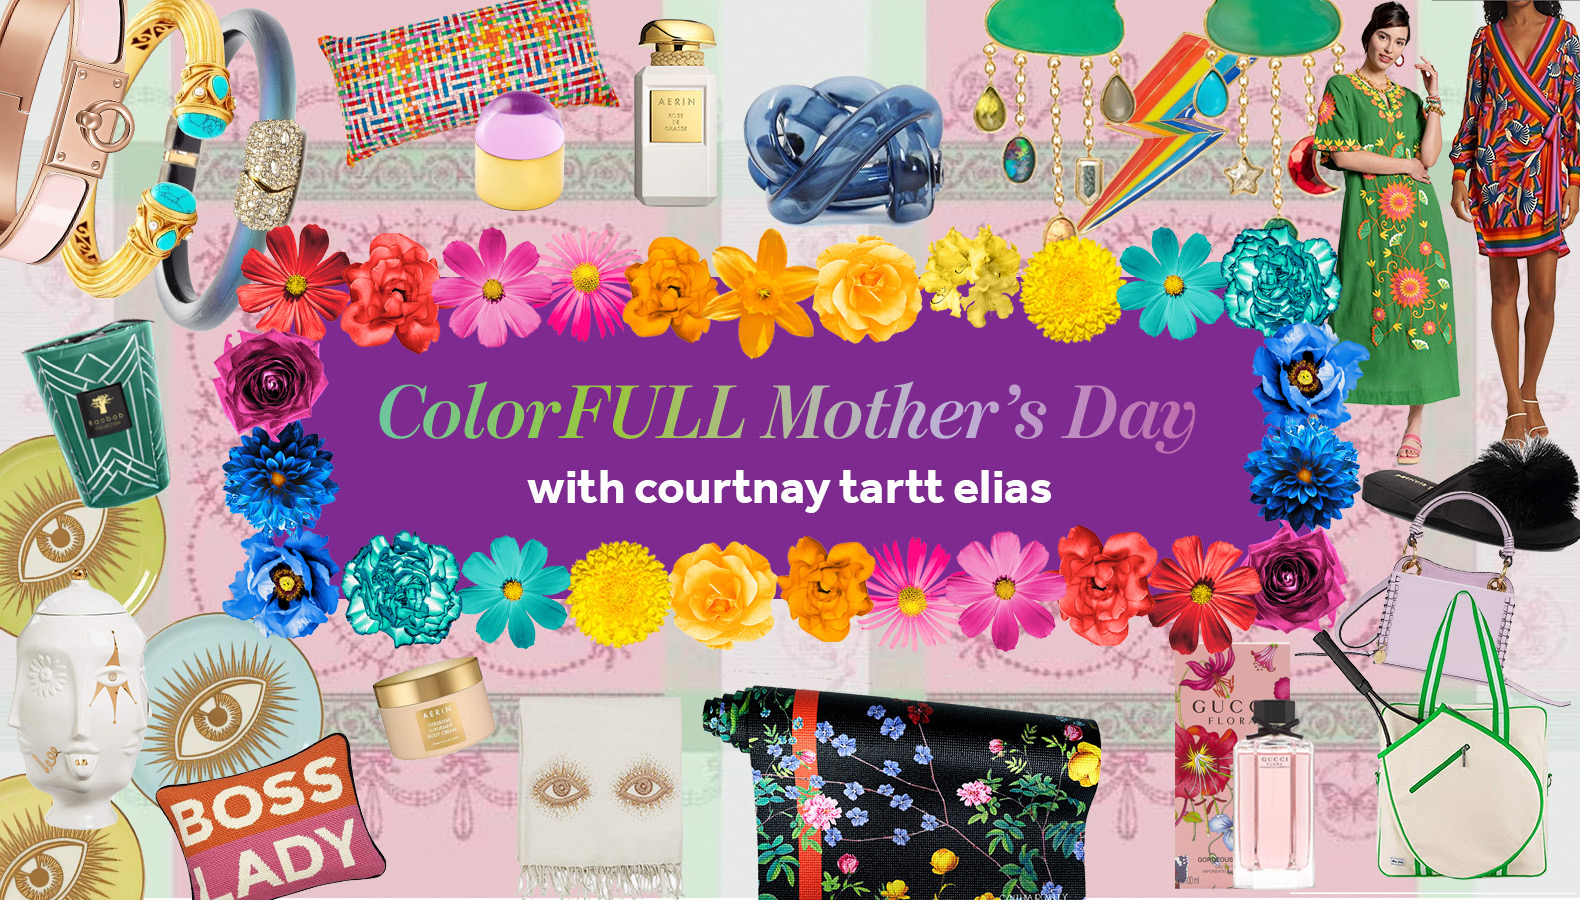 ColorFULL Mother’s Day Gift Guide